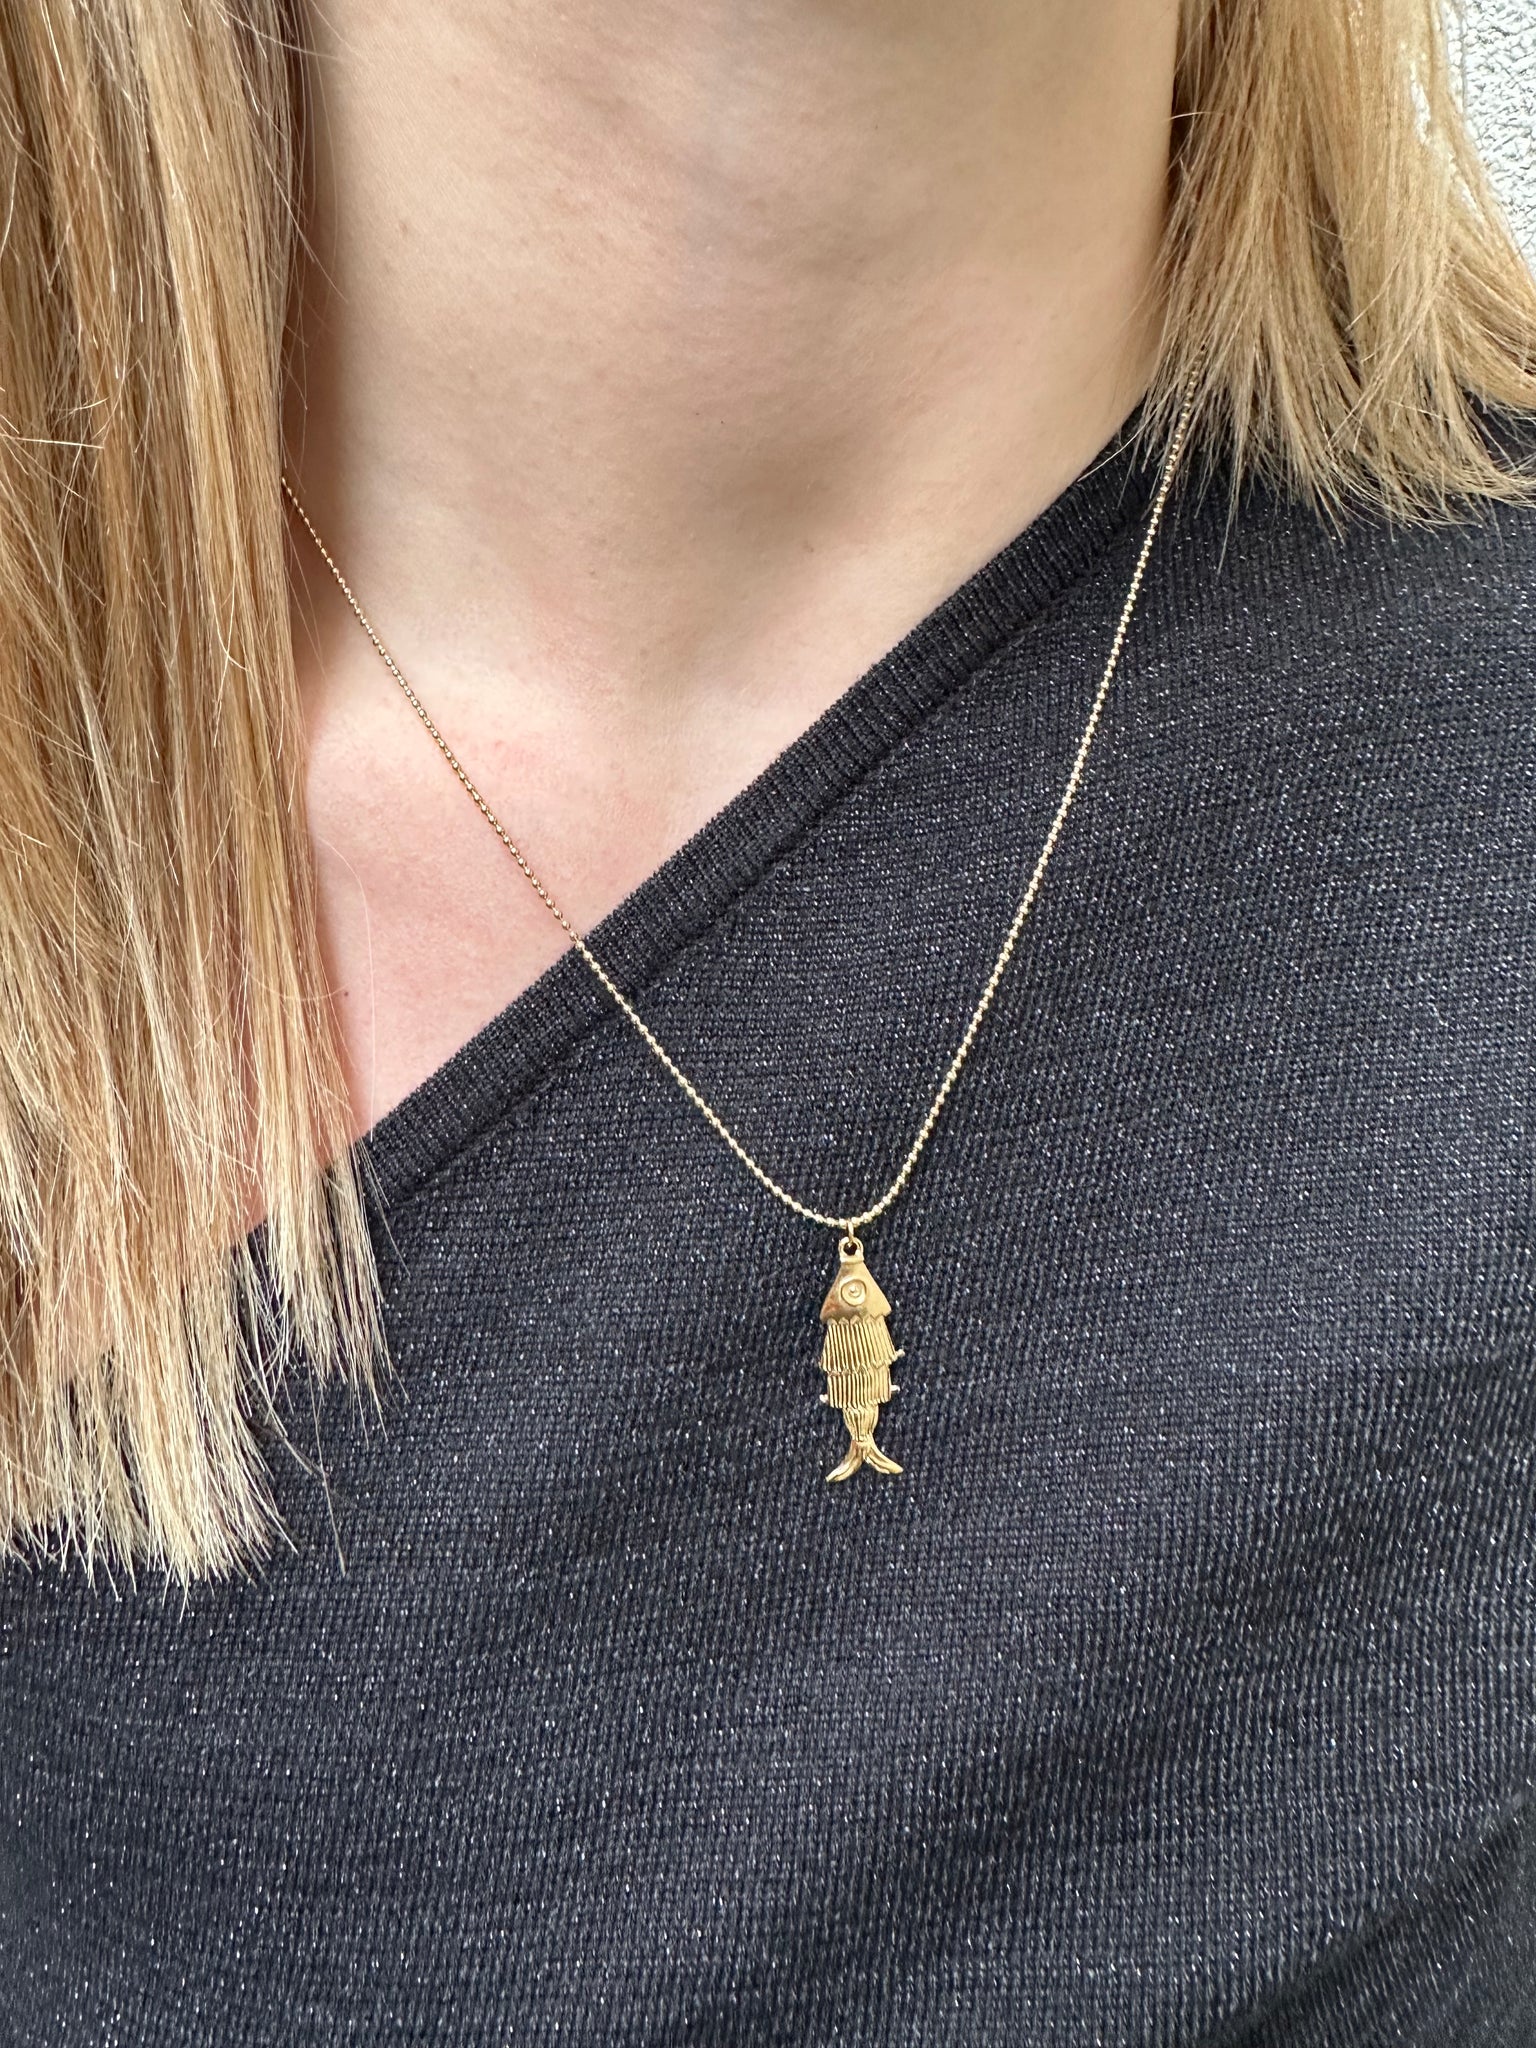 Fish necklace gold